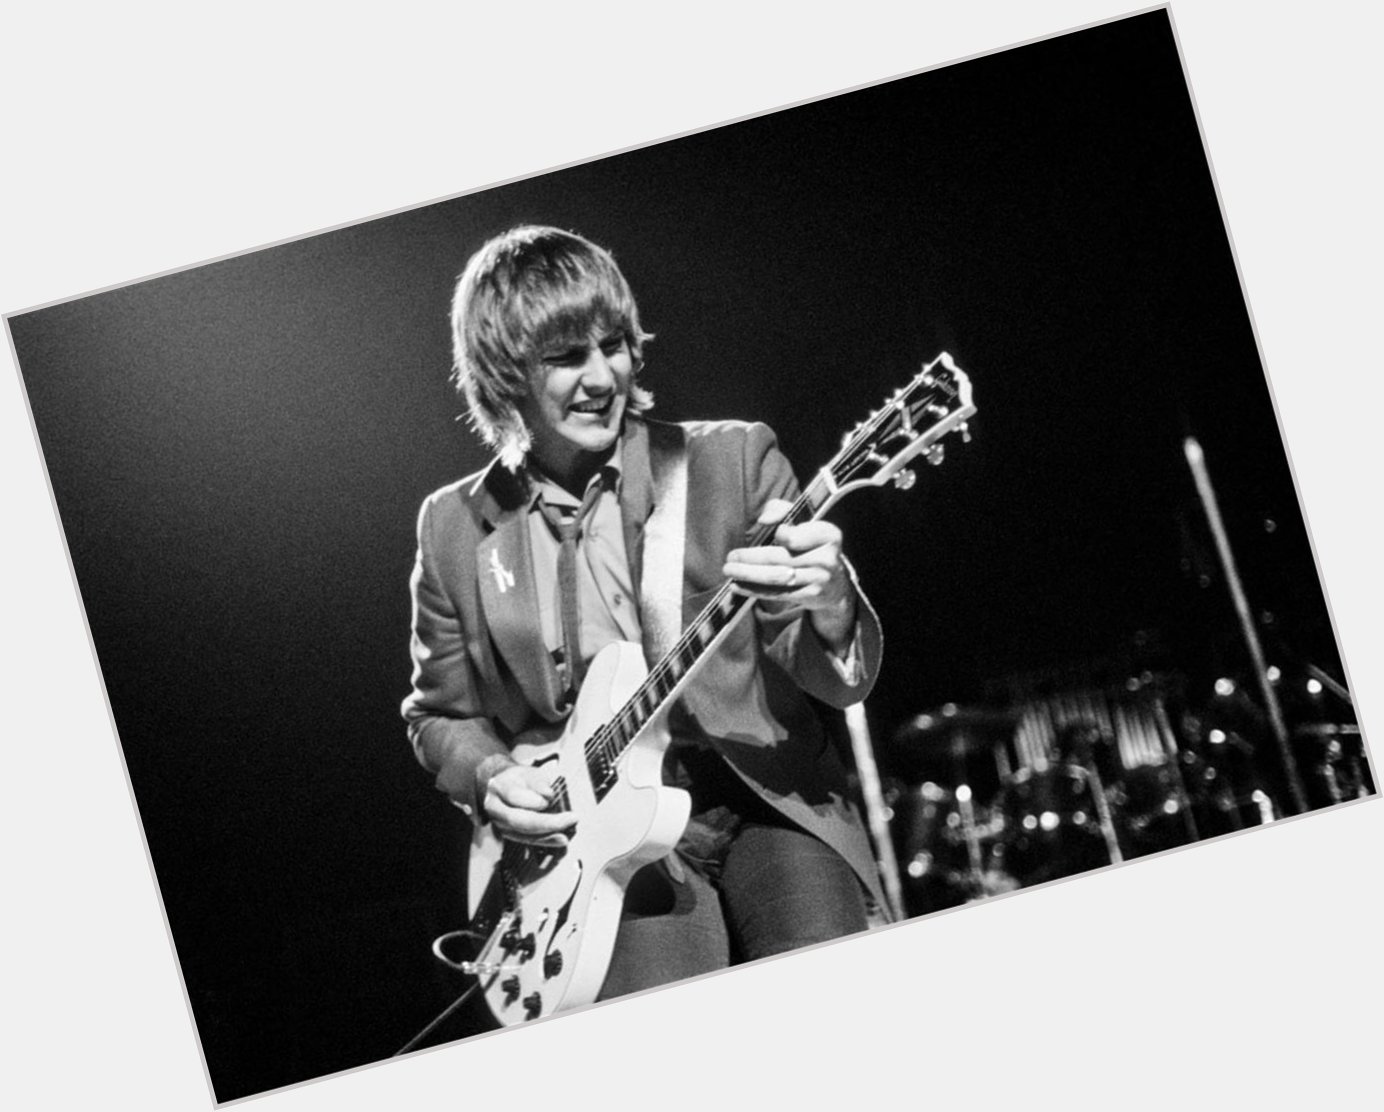 Happy Birthday to Rush guitarist Alex Lifeson, born on this day in Toronto, Ontario in 1953.    